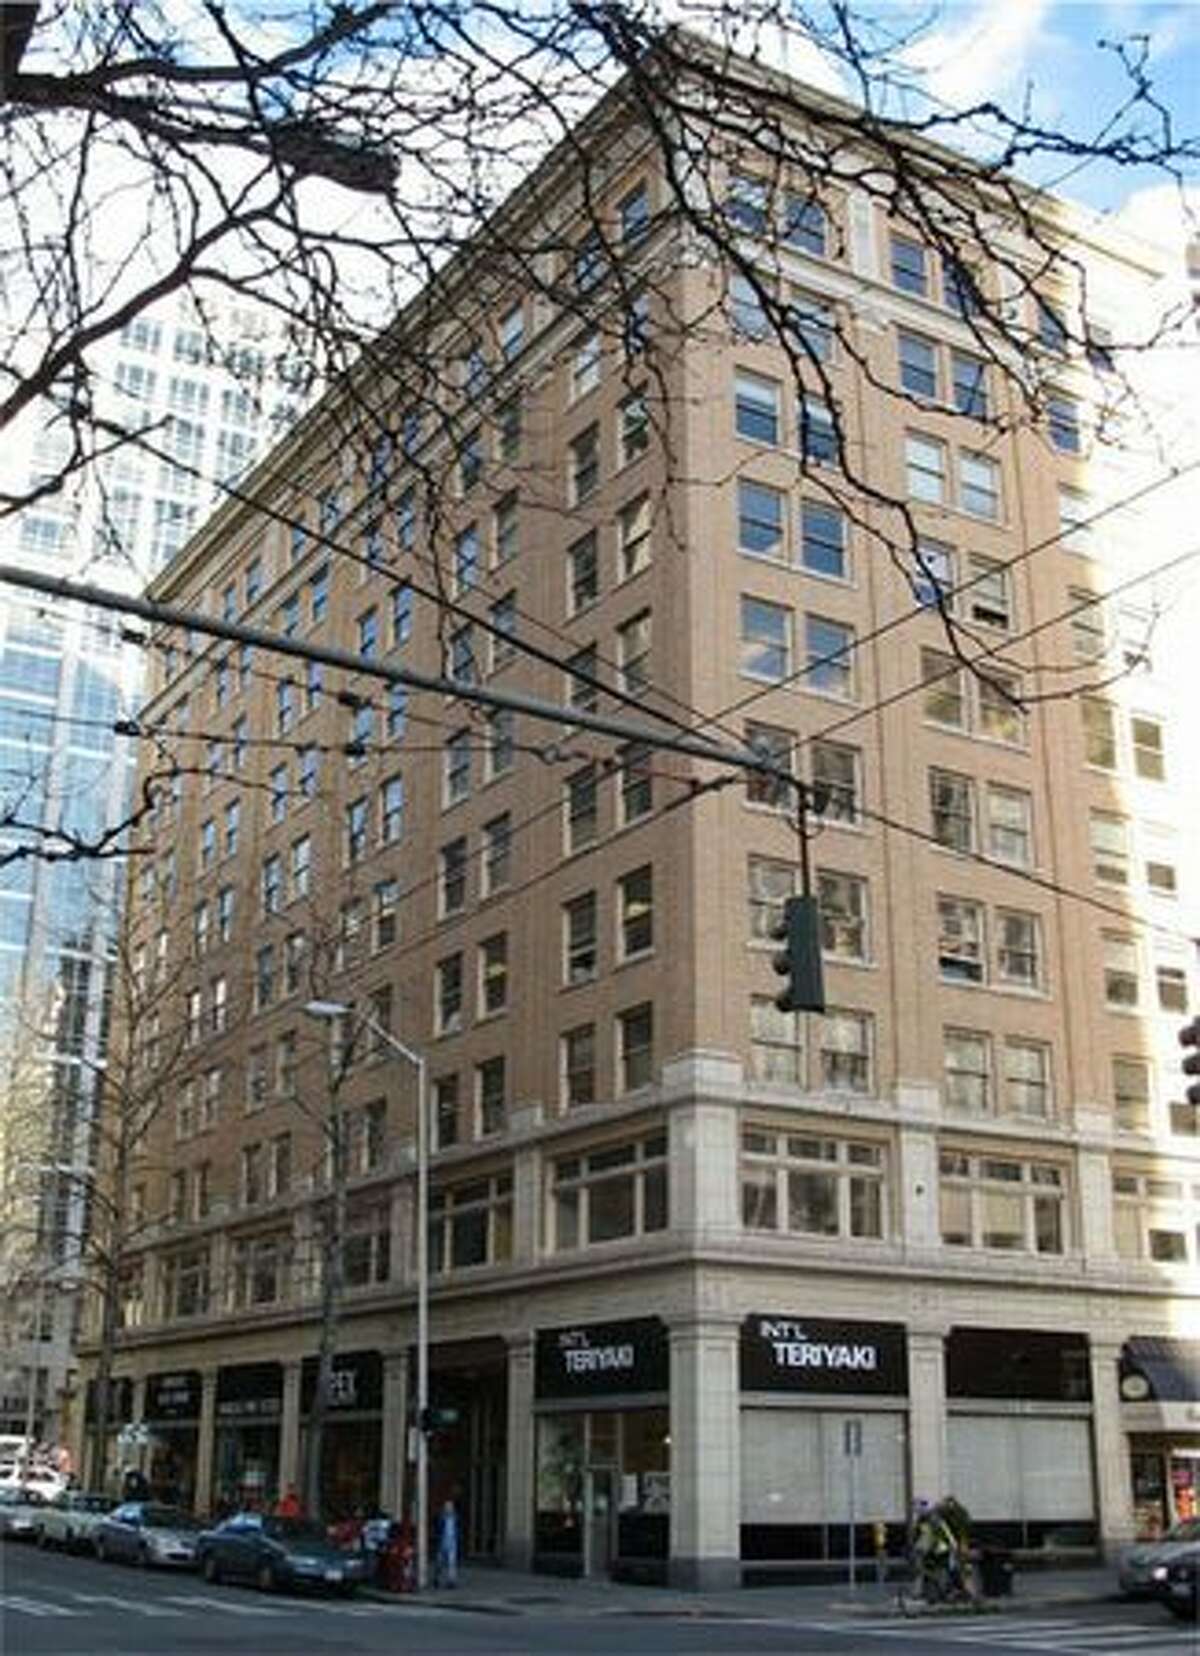 Downtown Seattle's Lloyd Building (photo courtesy city of Seattle).